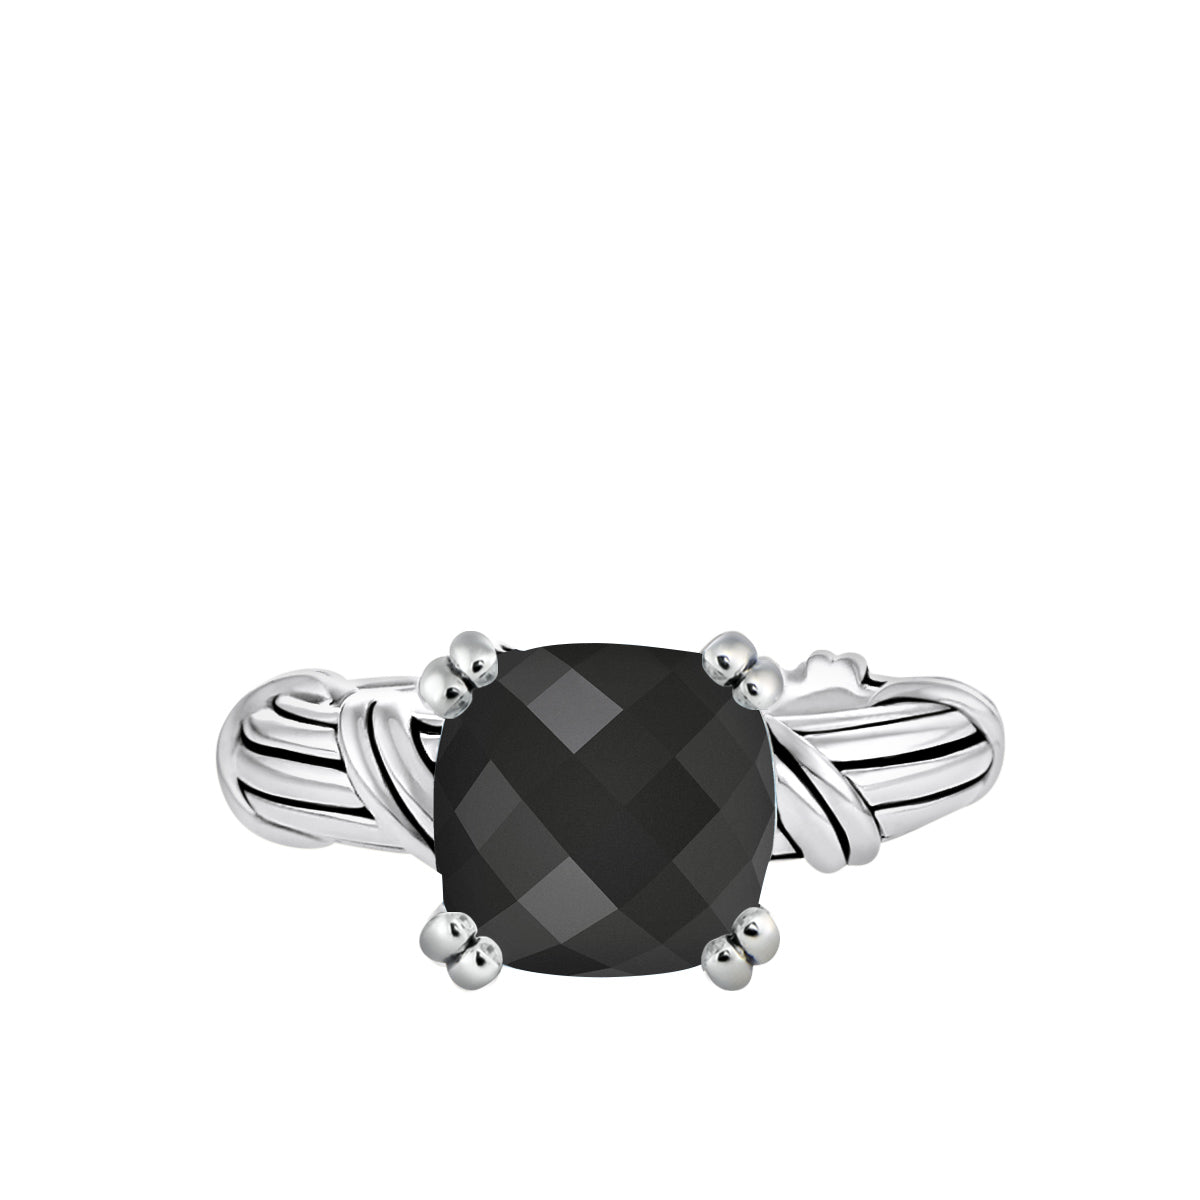 Fantasies Black Onyx Cocktail Ring in sterling silver 10mm